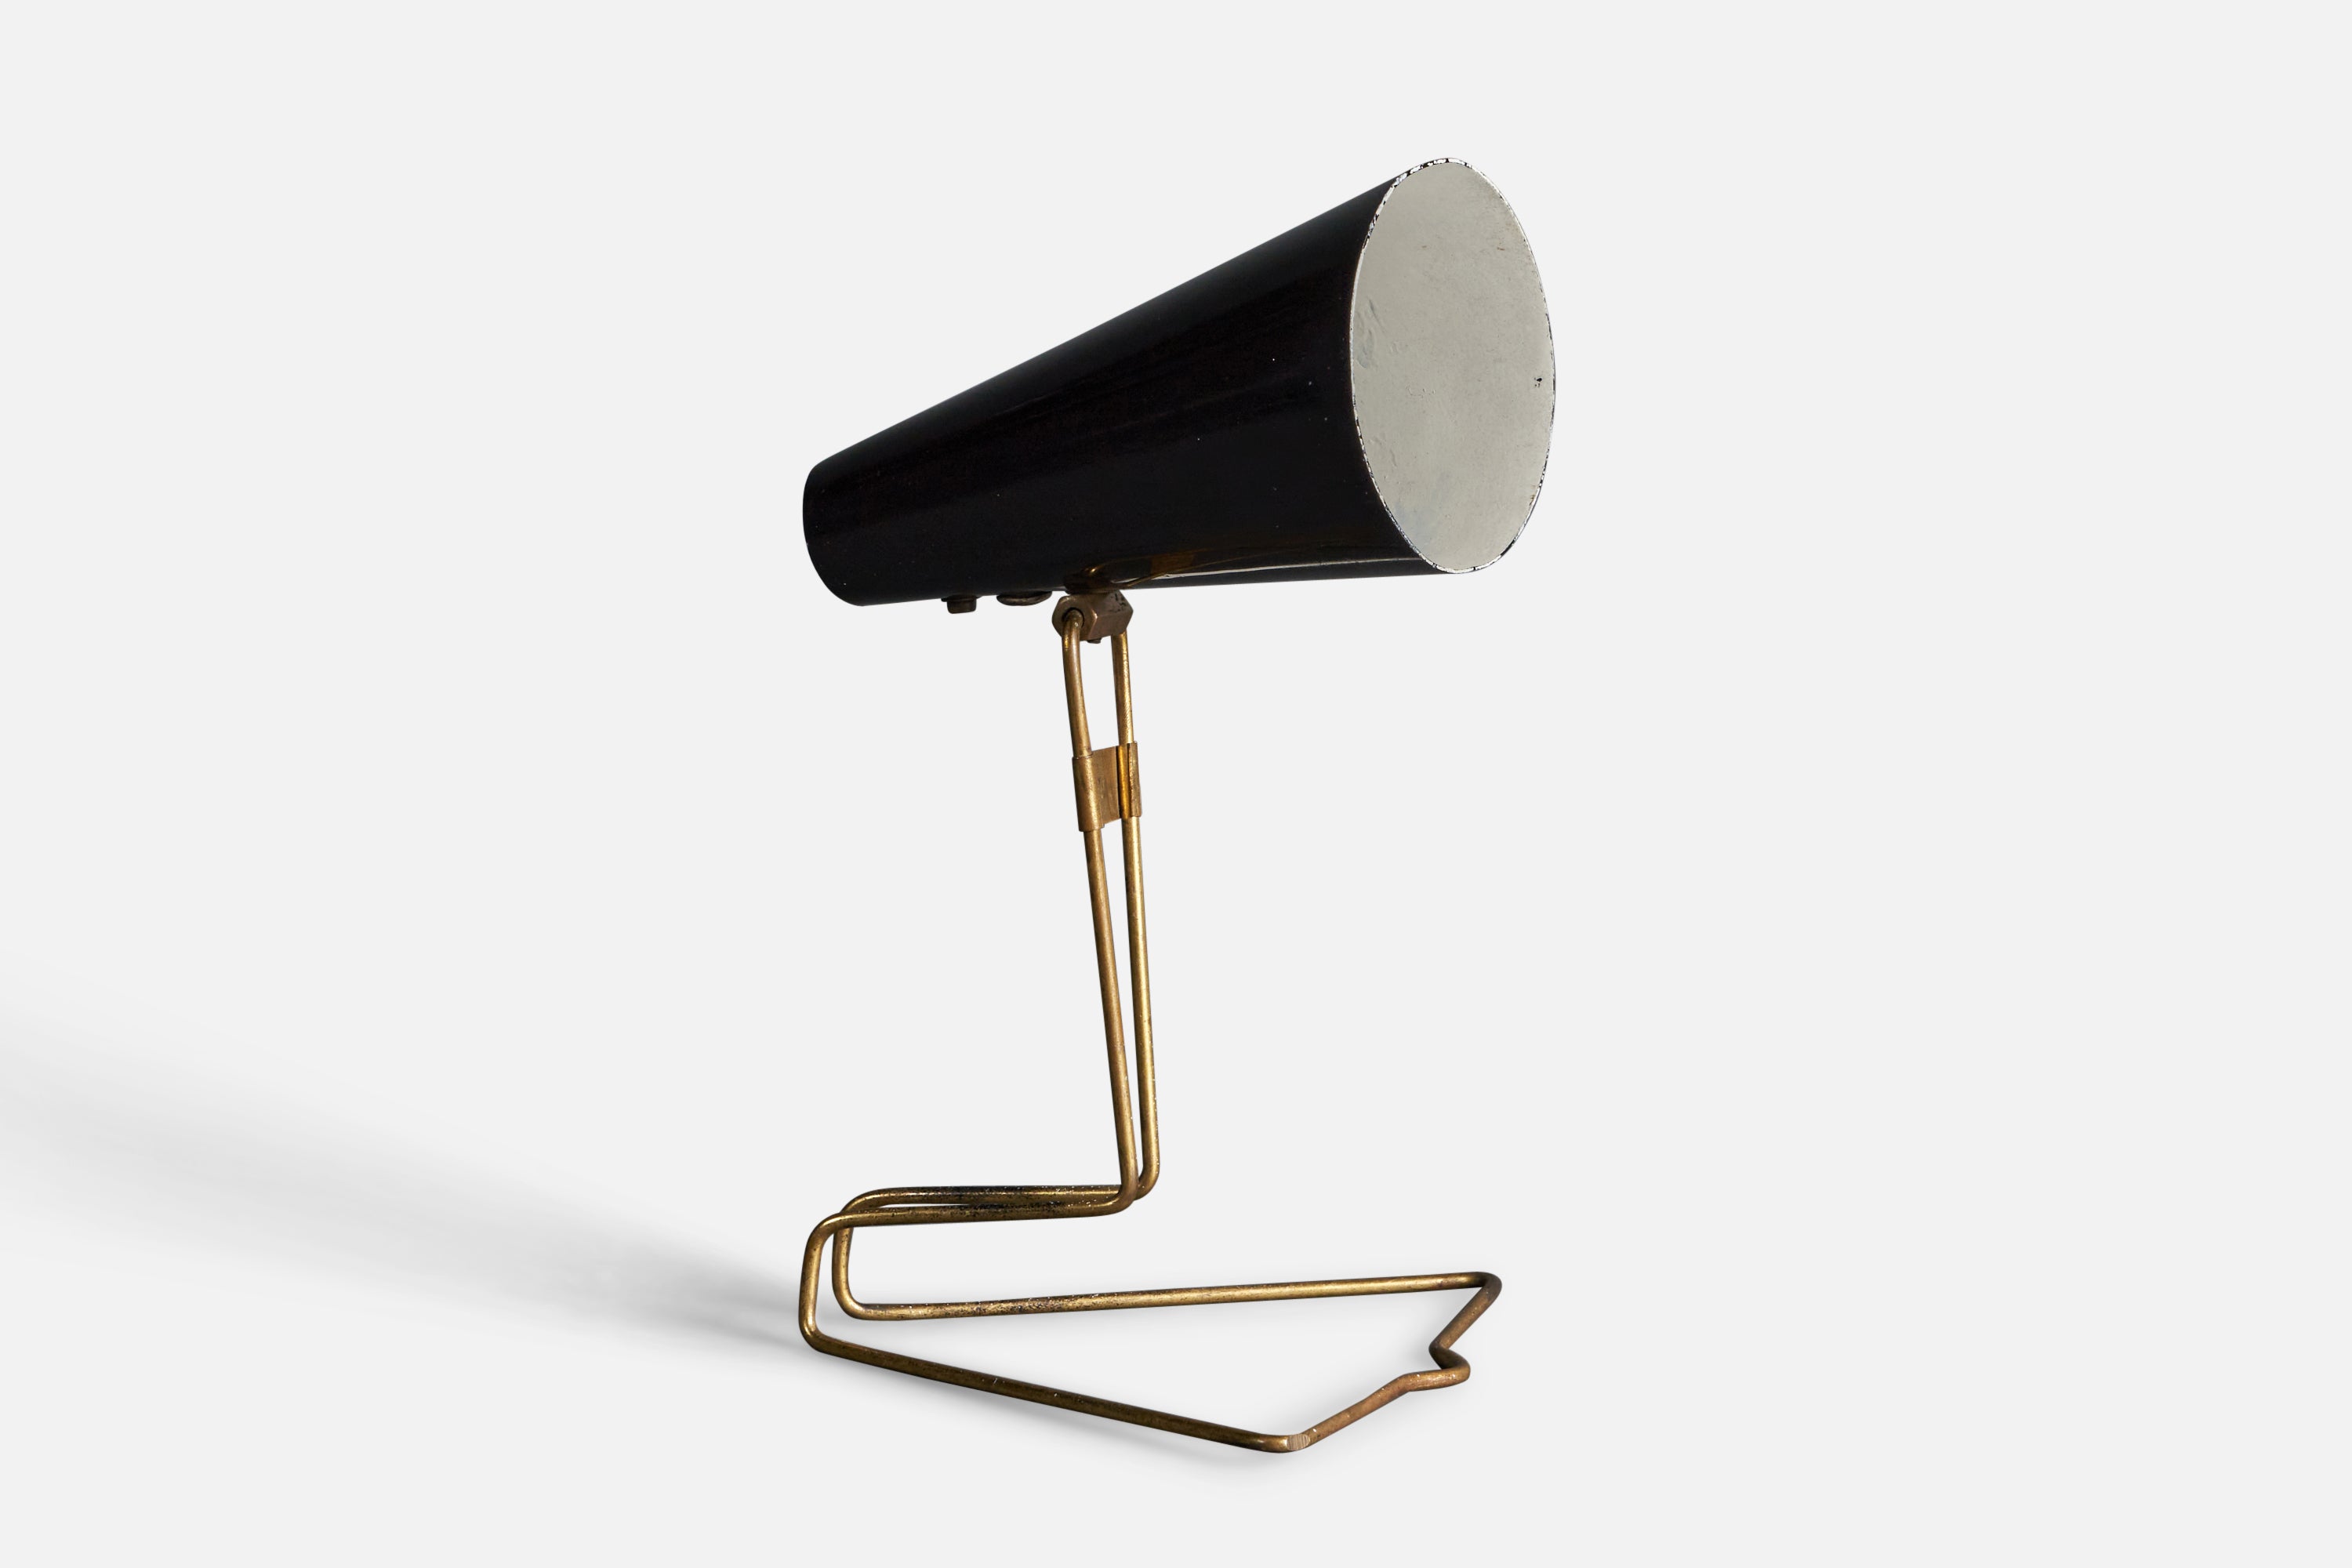 Idman, Small Adjustable Table Lamp, Brass, Lacquered Metal, Finland, 1950s For Sale